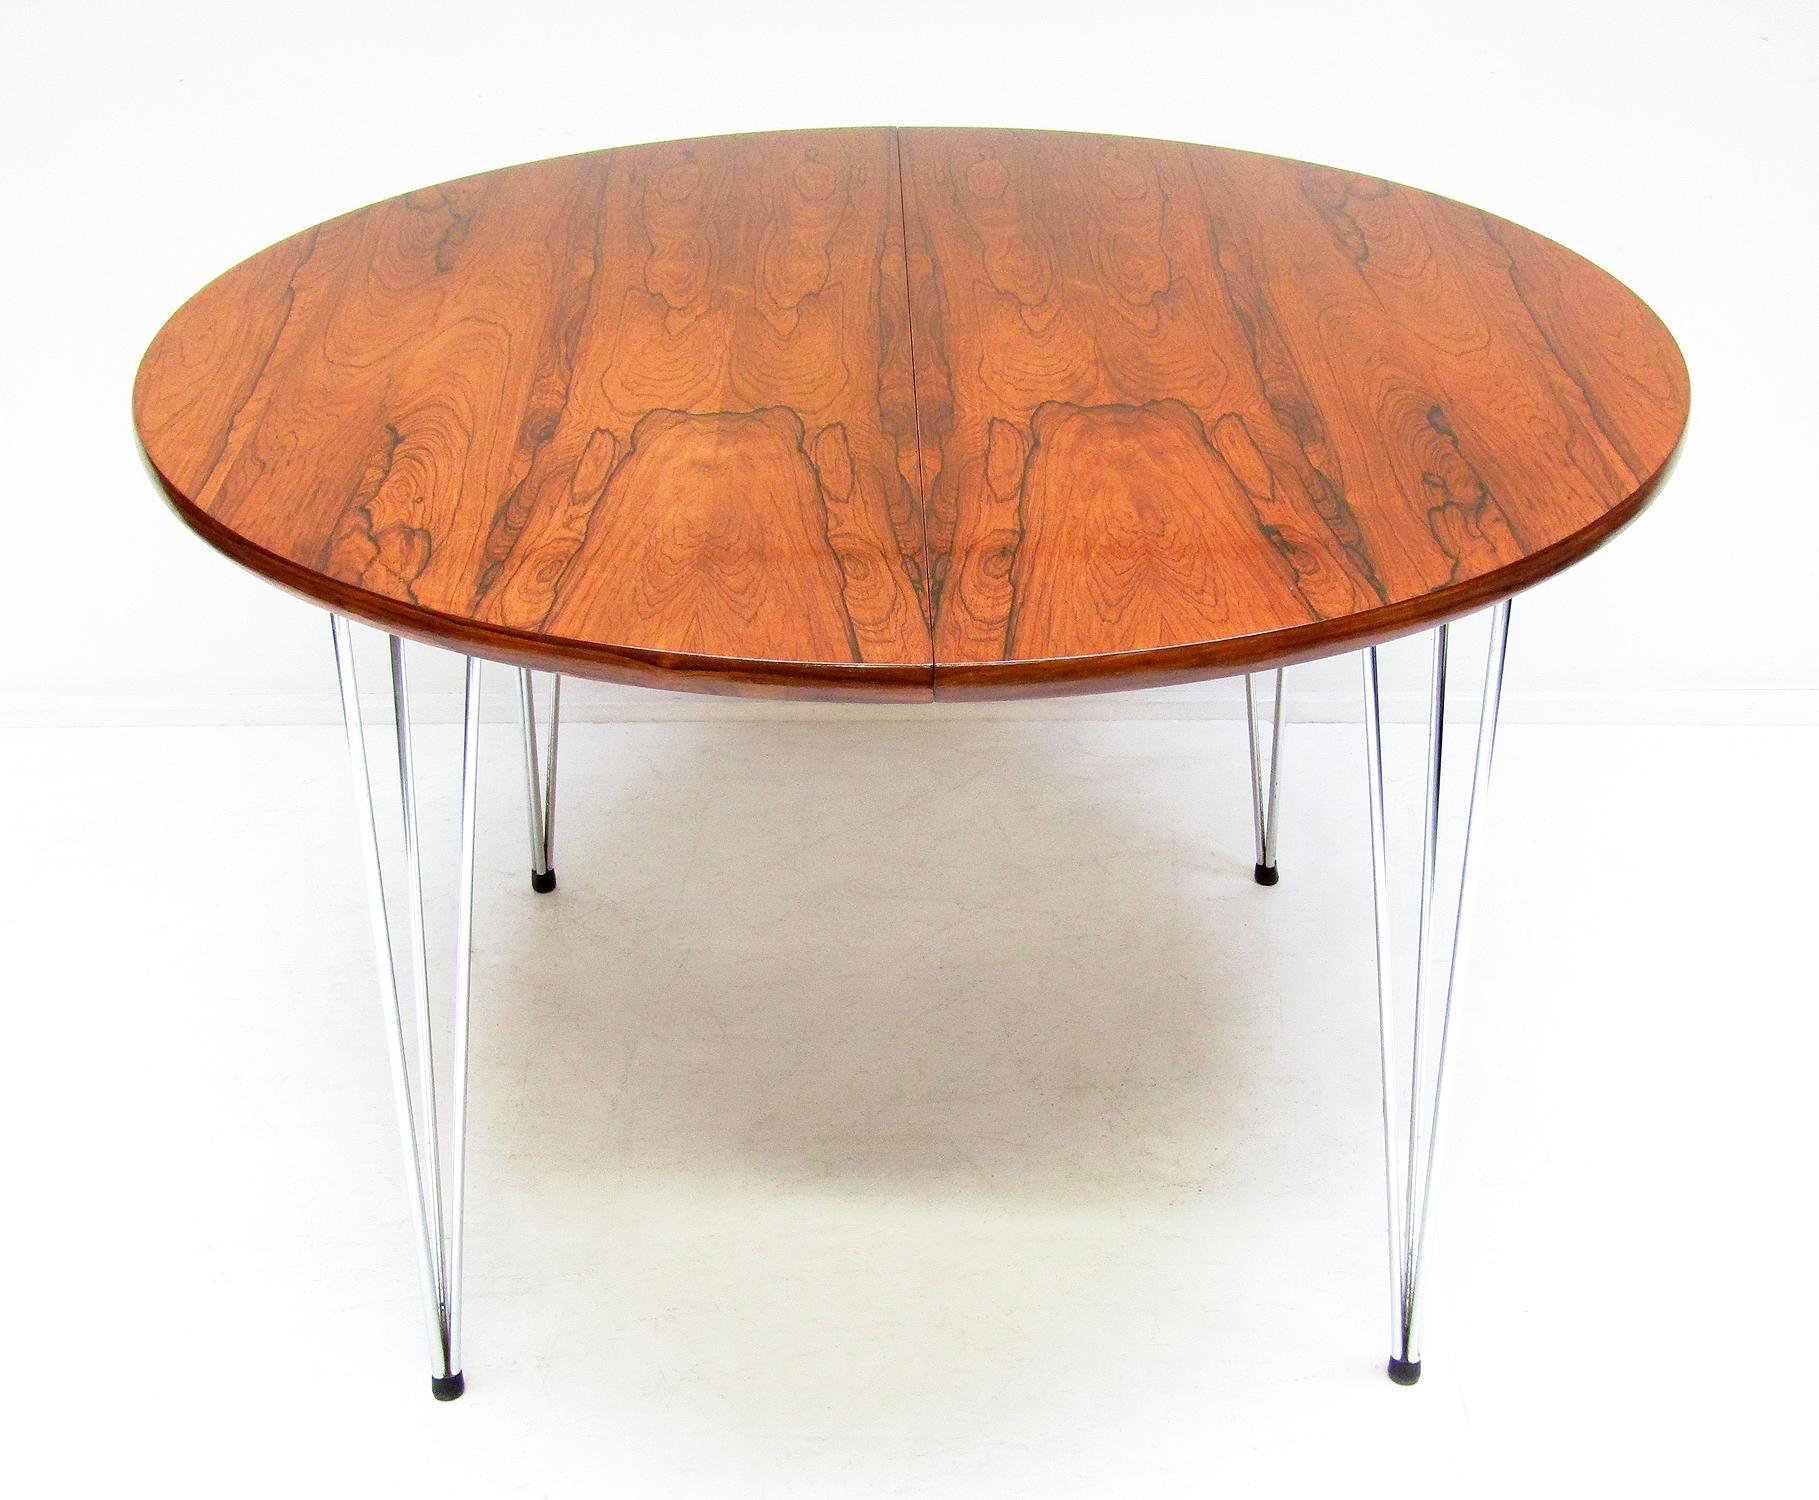 20th Century 1960s Norwegian Rosewood & Chrome Extending Dining Table by Hans Brattrud